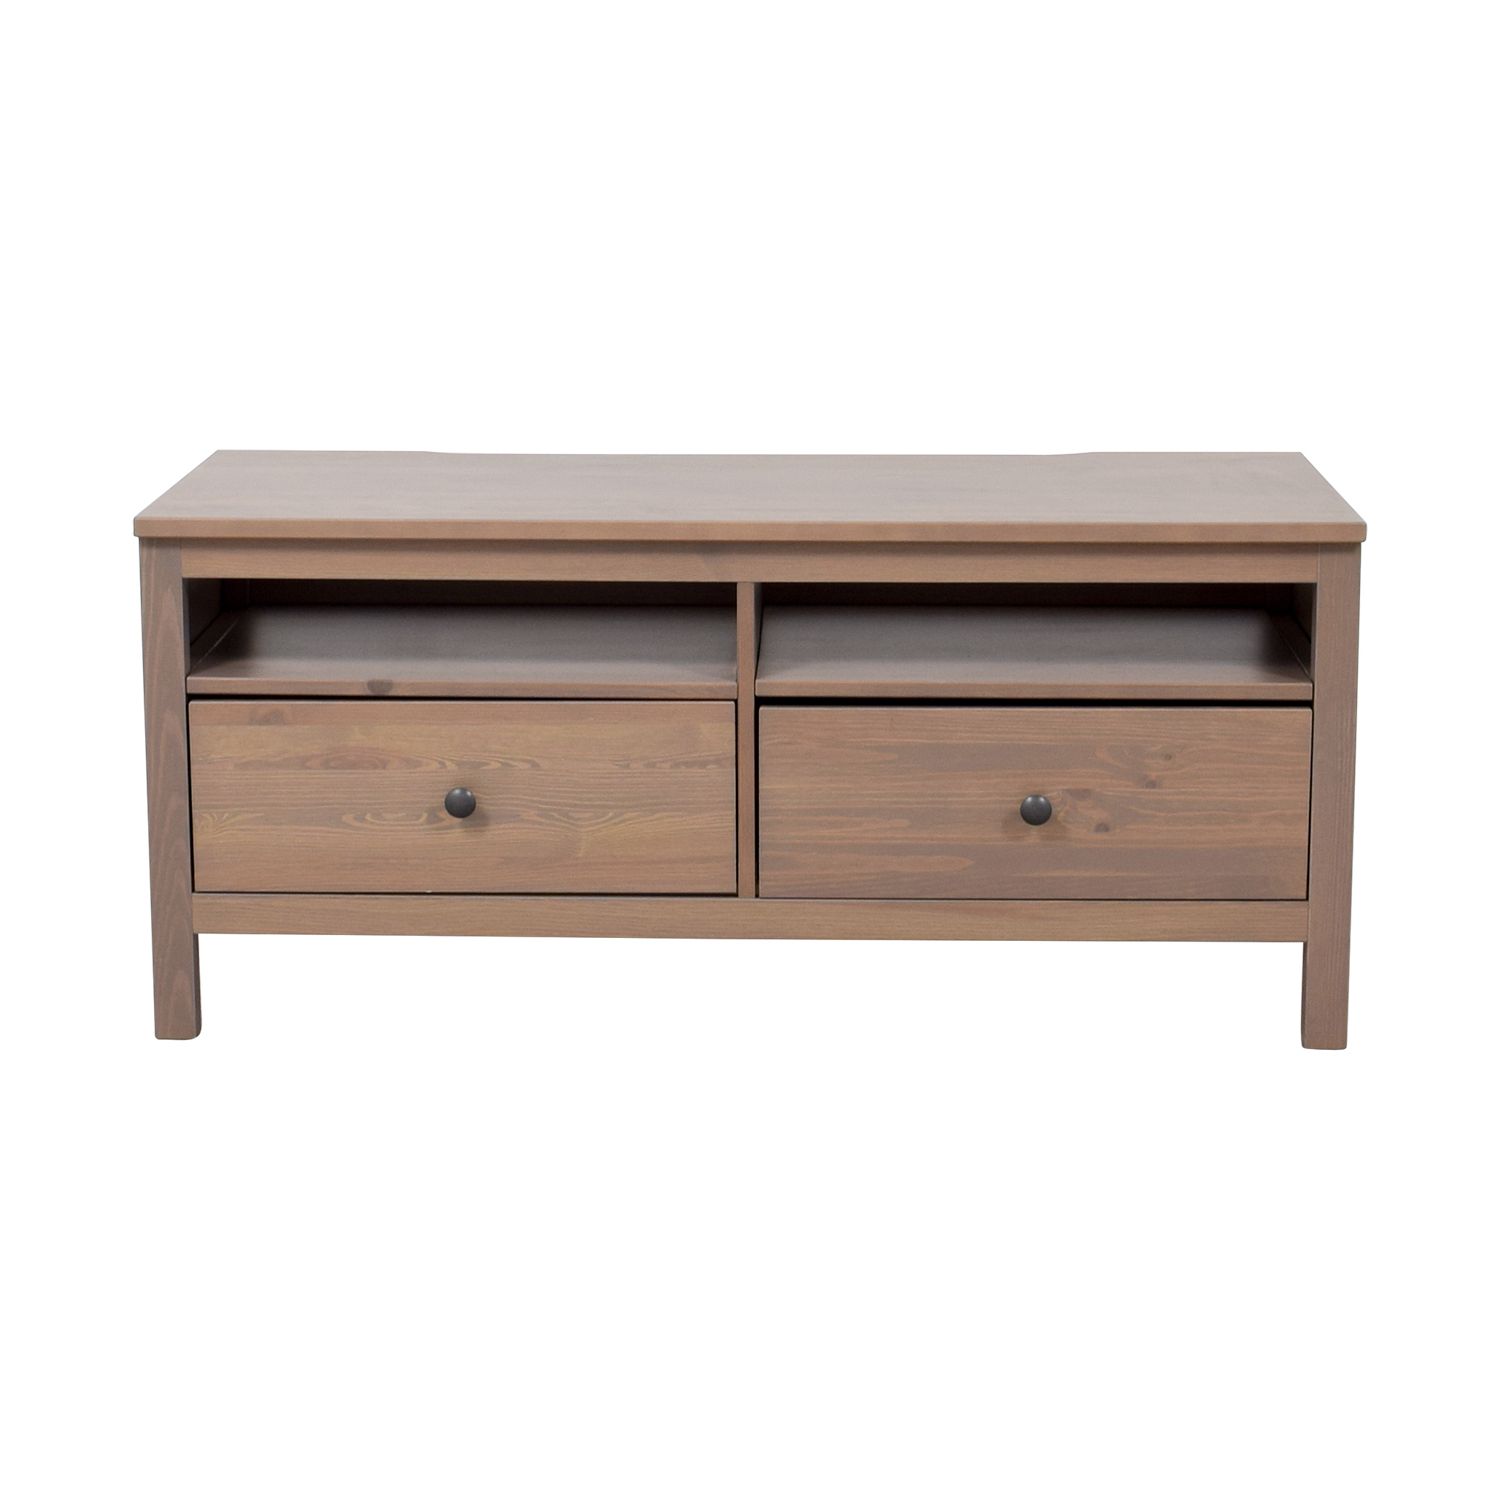 [%90% Off – Ikea Ikea Two Drawer Tv Stand / Storage Throughout Fashionable Tv Drawer Units|tv Drawer Units Regarding Preferred 90% Off – Ikea Ikea Two Drawer Tv Stand / Storage|2018 Tv Drawer Units Regarding 90% Off – Ikea Ikea Two Drawer Tv Stand / Storage|2017 90% Off – Ikea Ikea Two Drawer Tv Stand / Storage For Tv Drawer Units%] (View 14 of 20)